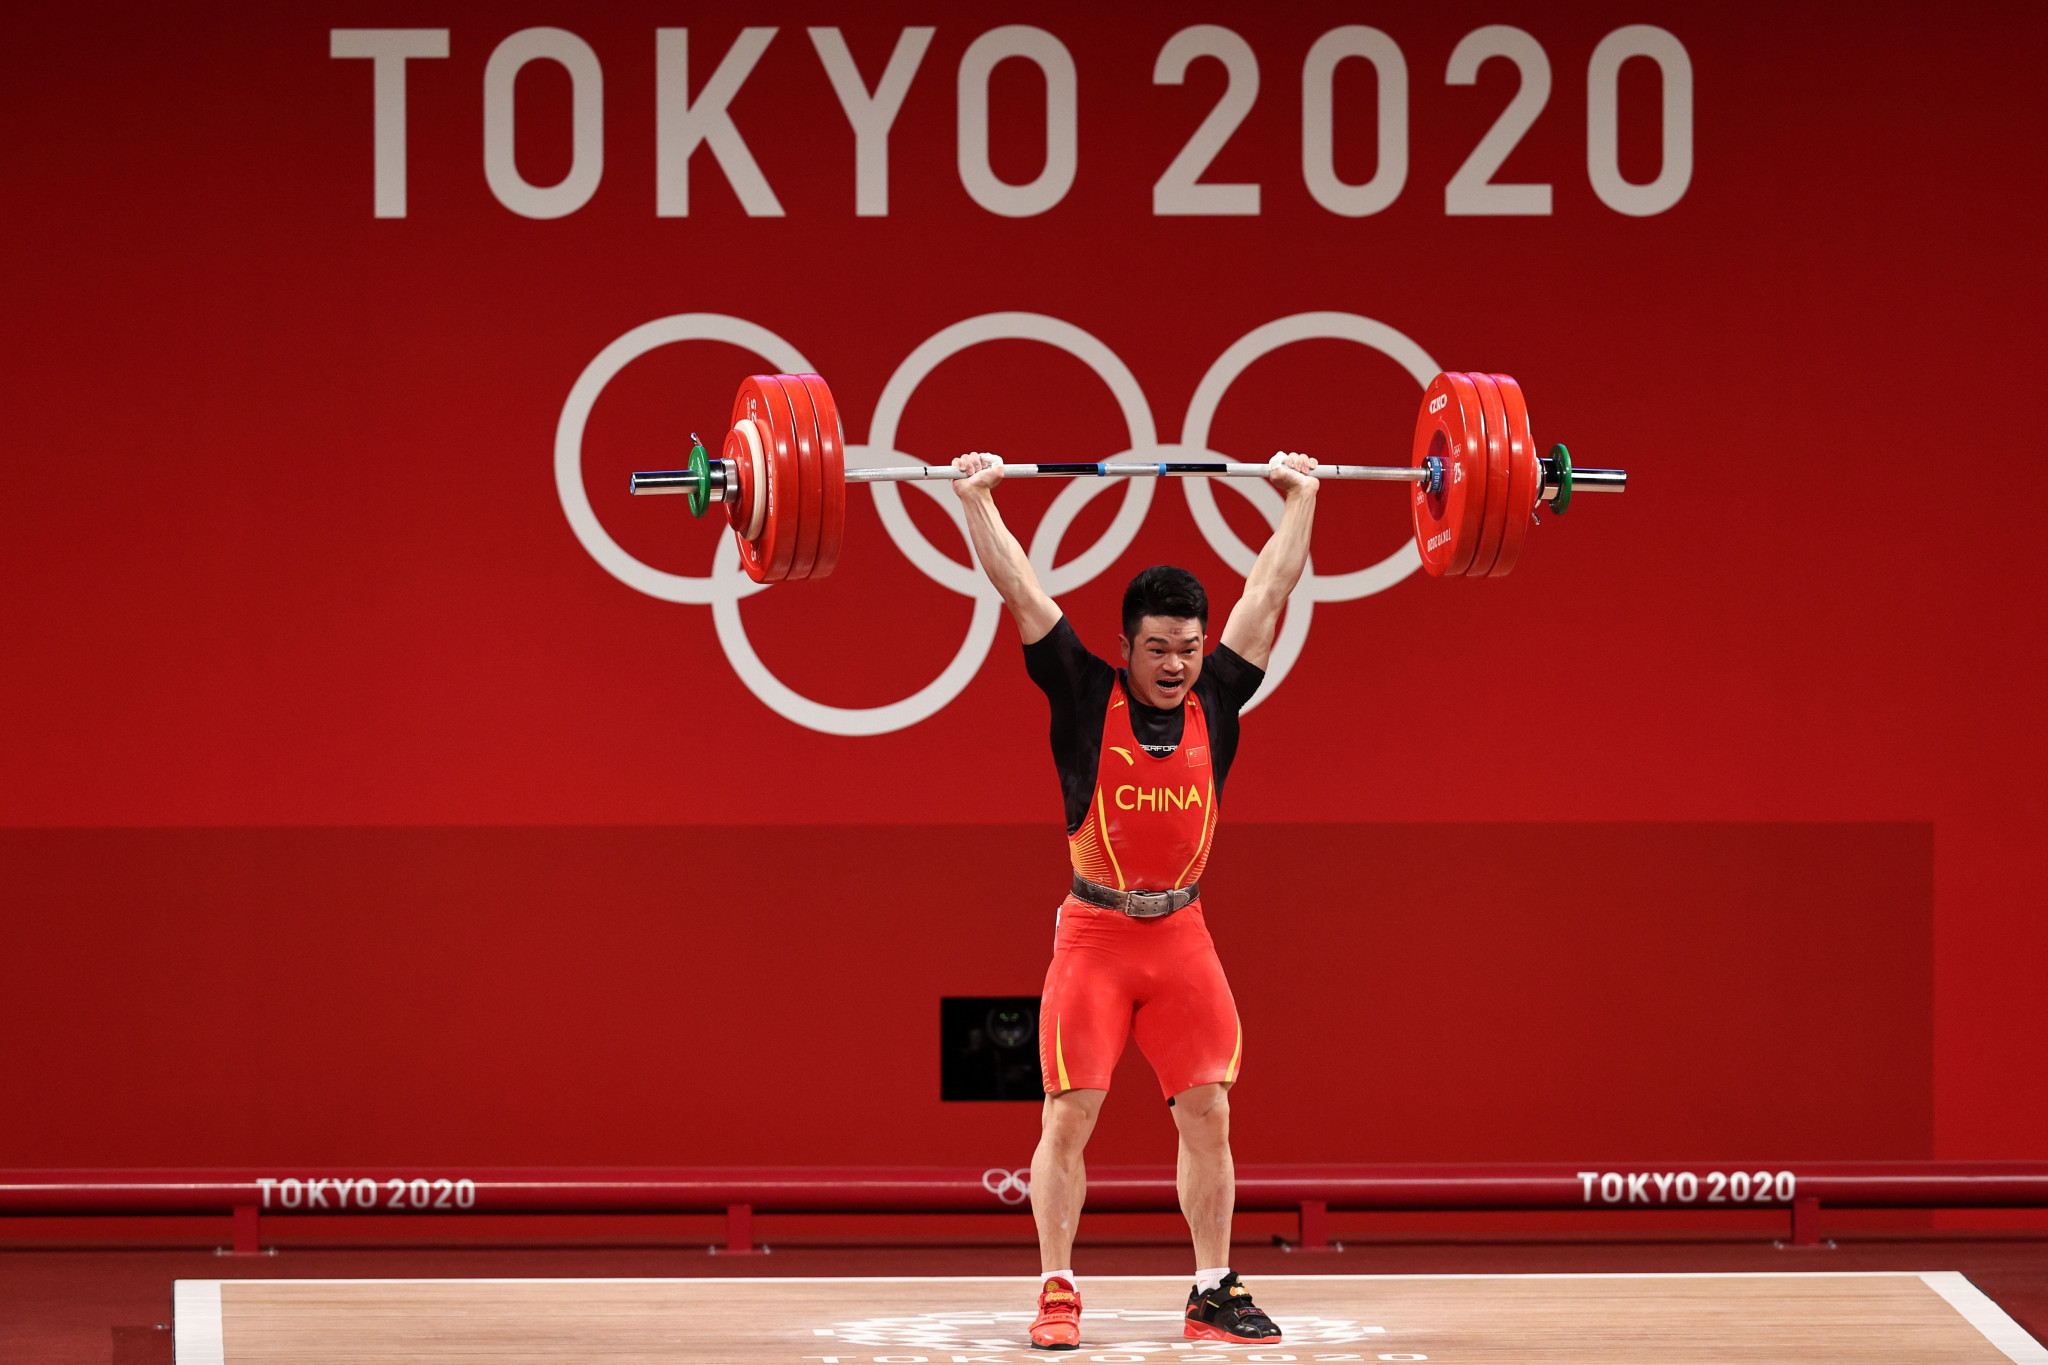 China's Shi Zhiyong is entered in the non-Olympic 81kg category at next month's IWF World Championships ©Getty Images